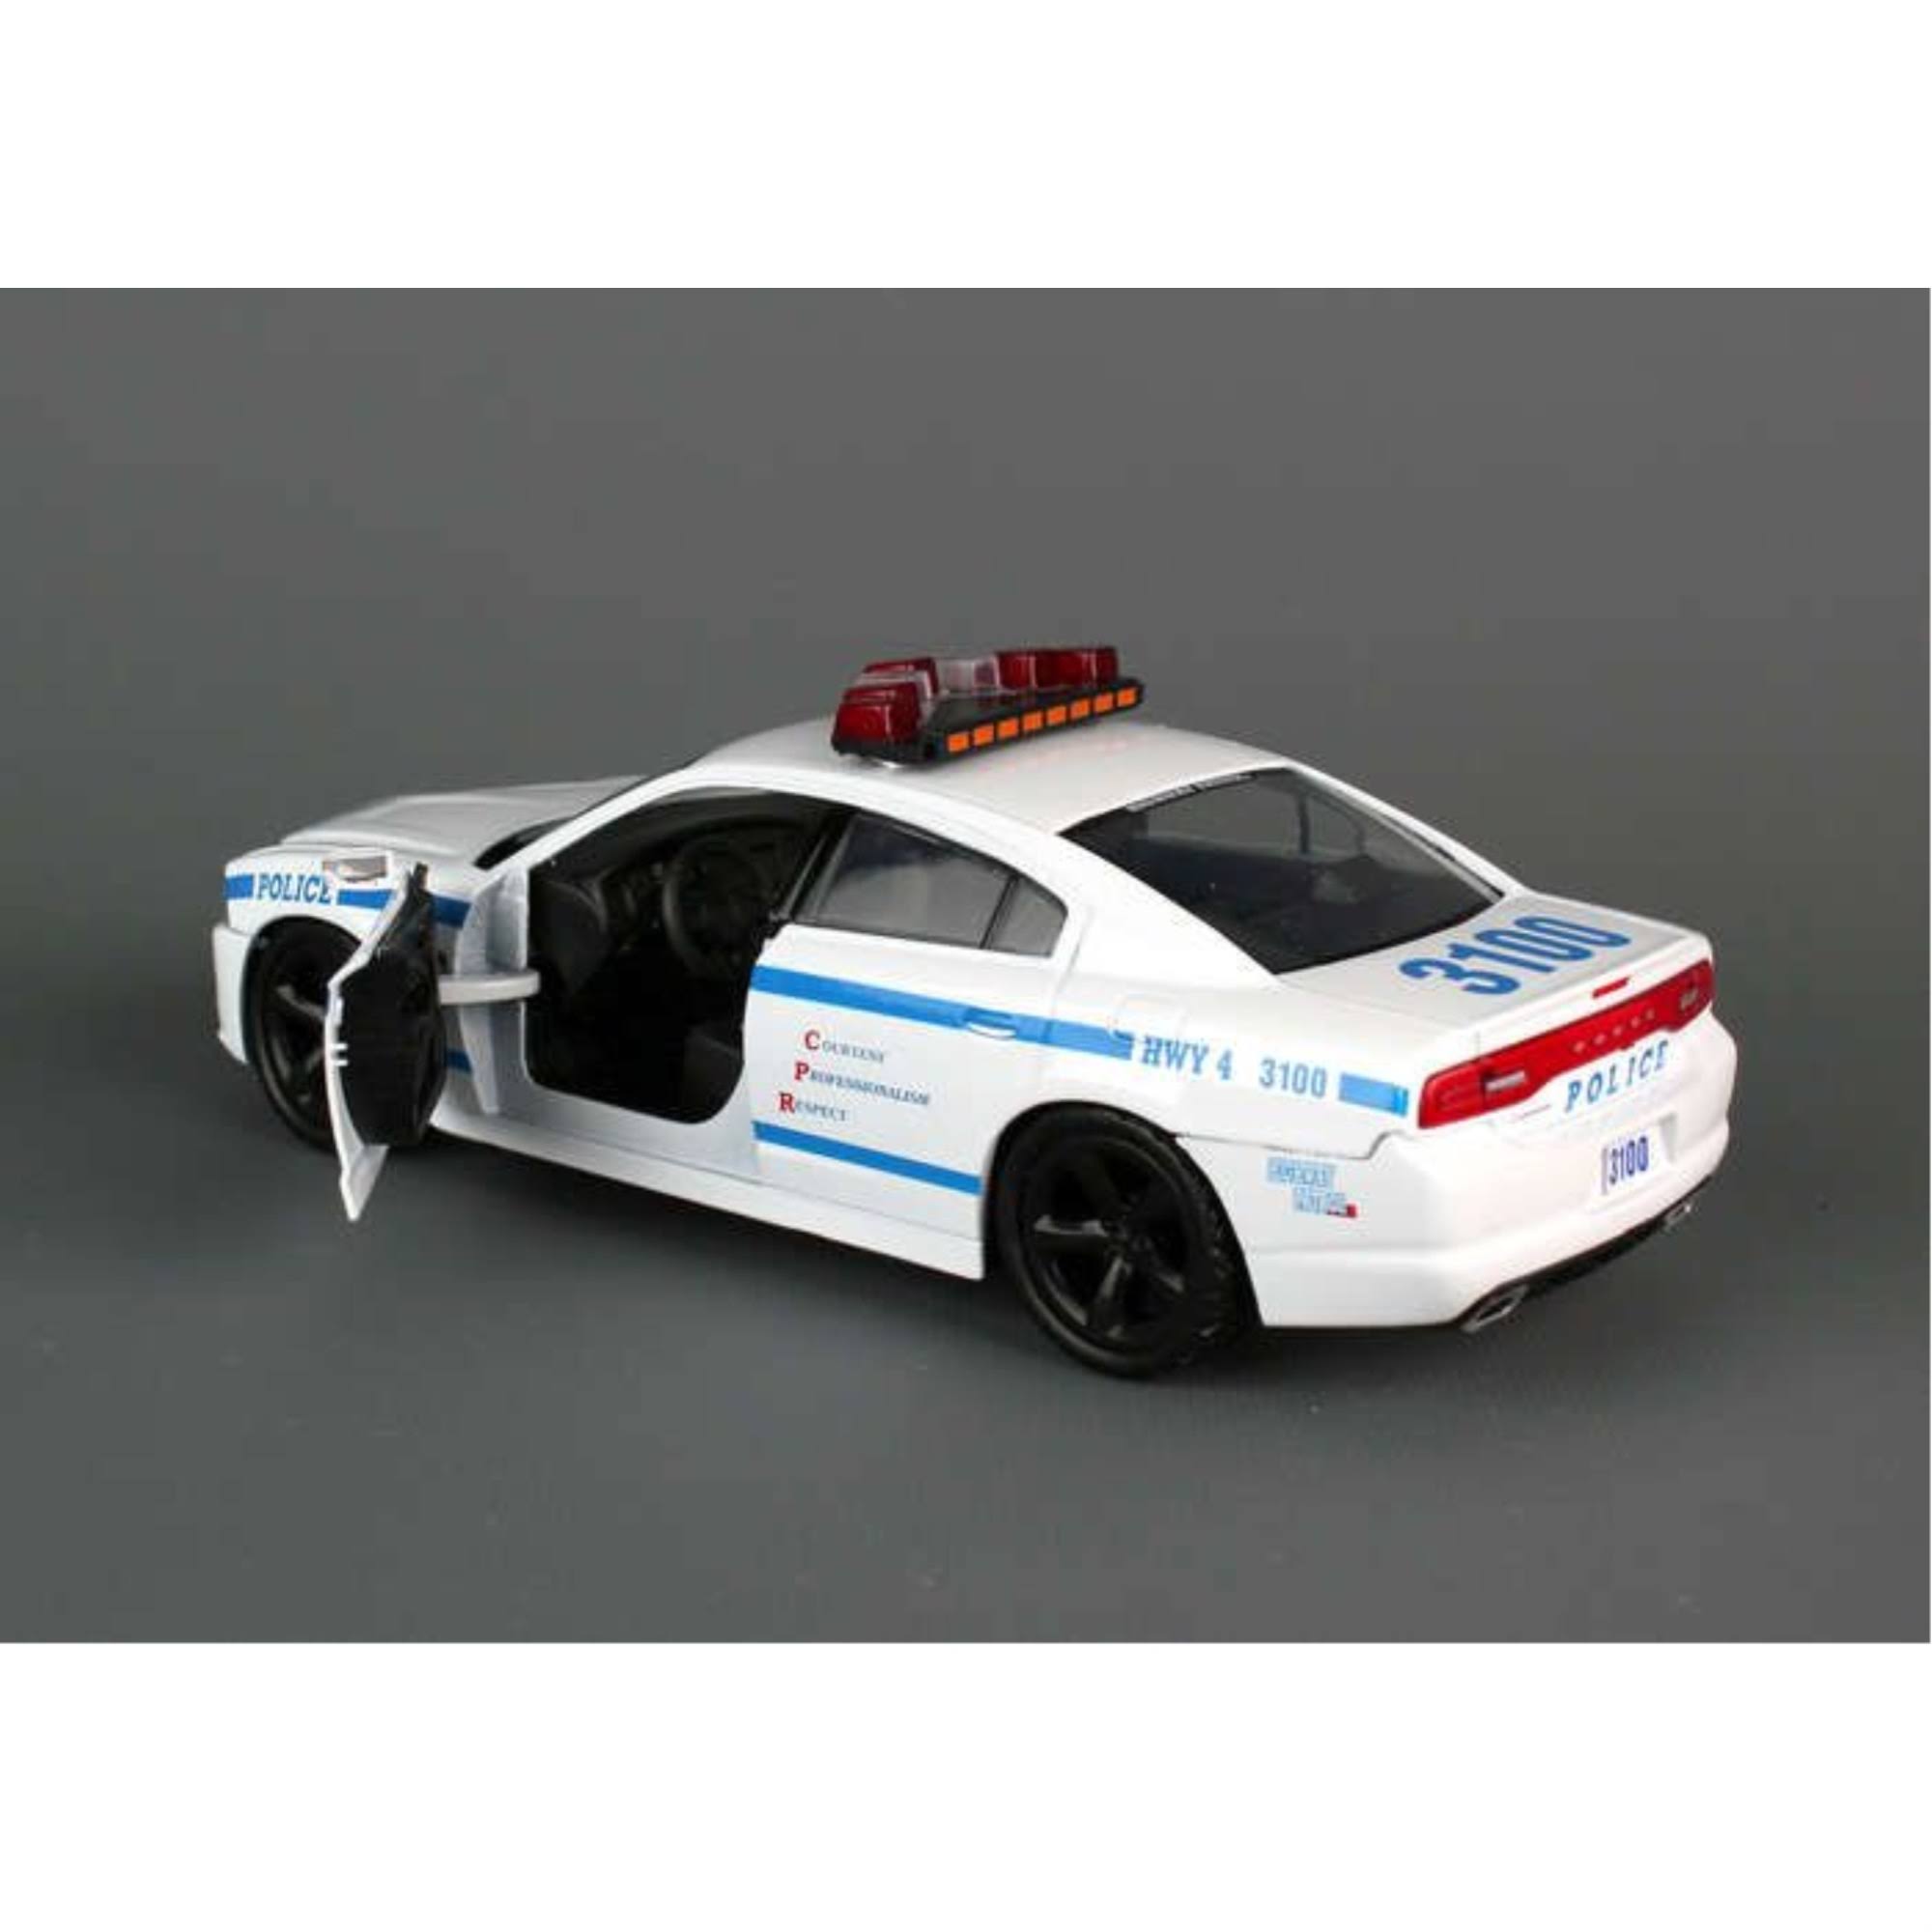 Daron NYPD Dodge Charger Diecast Vehicle 1/24-Scale